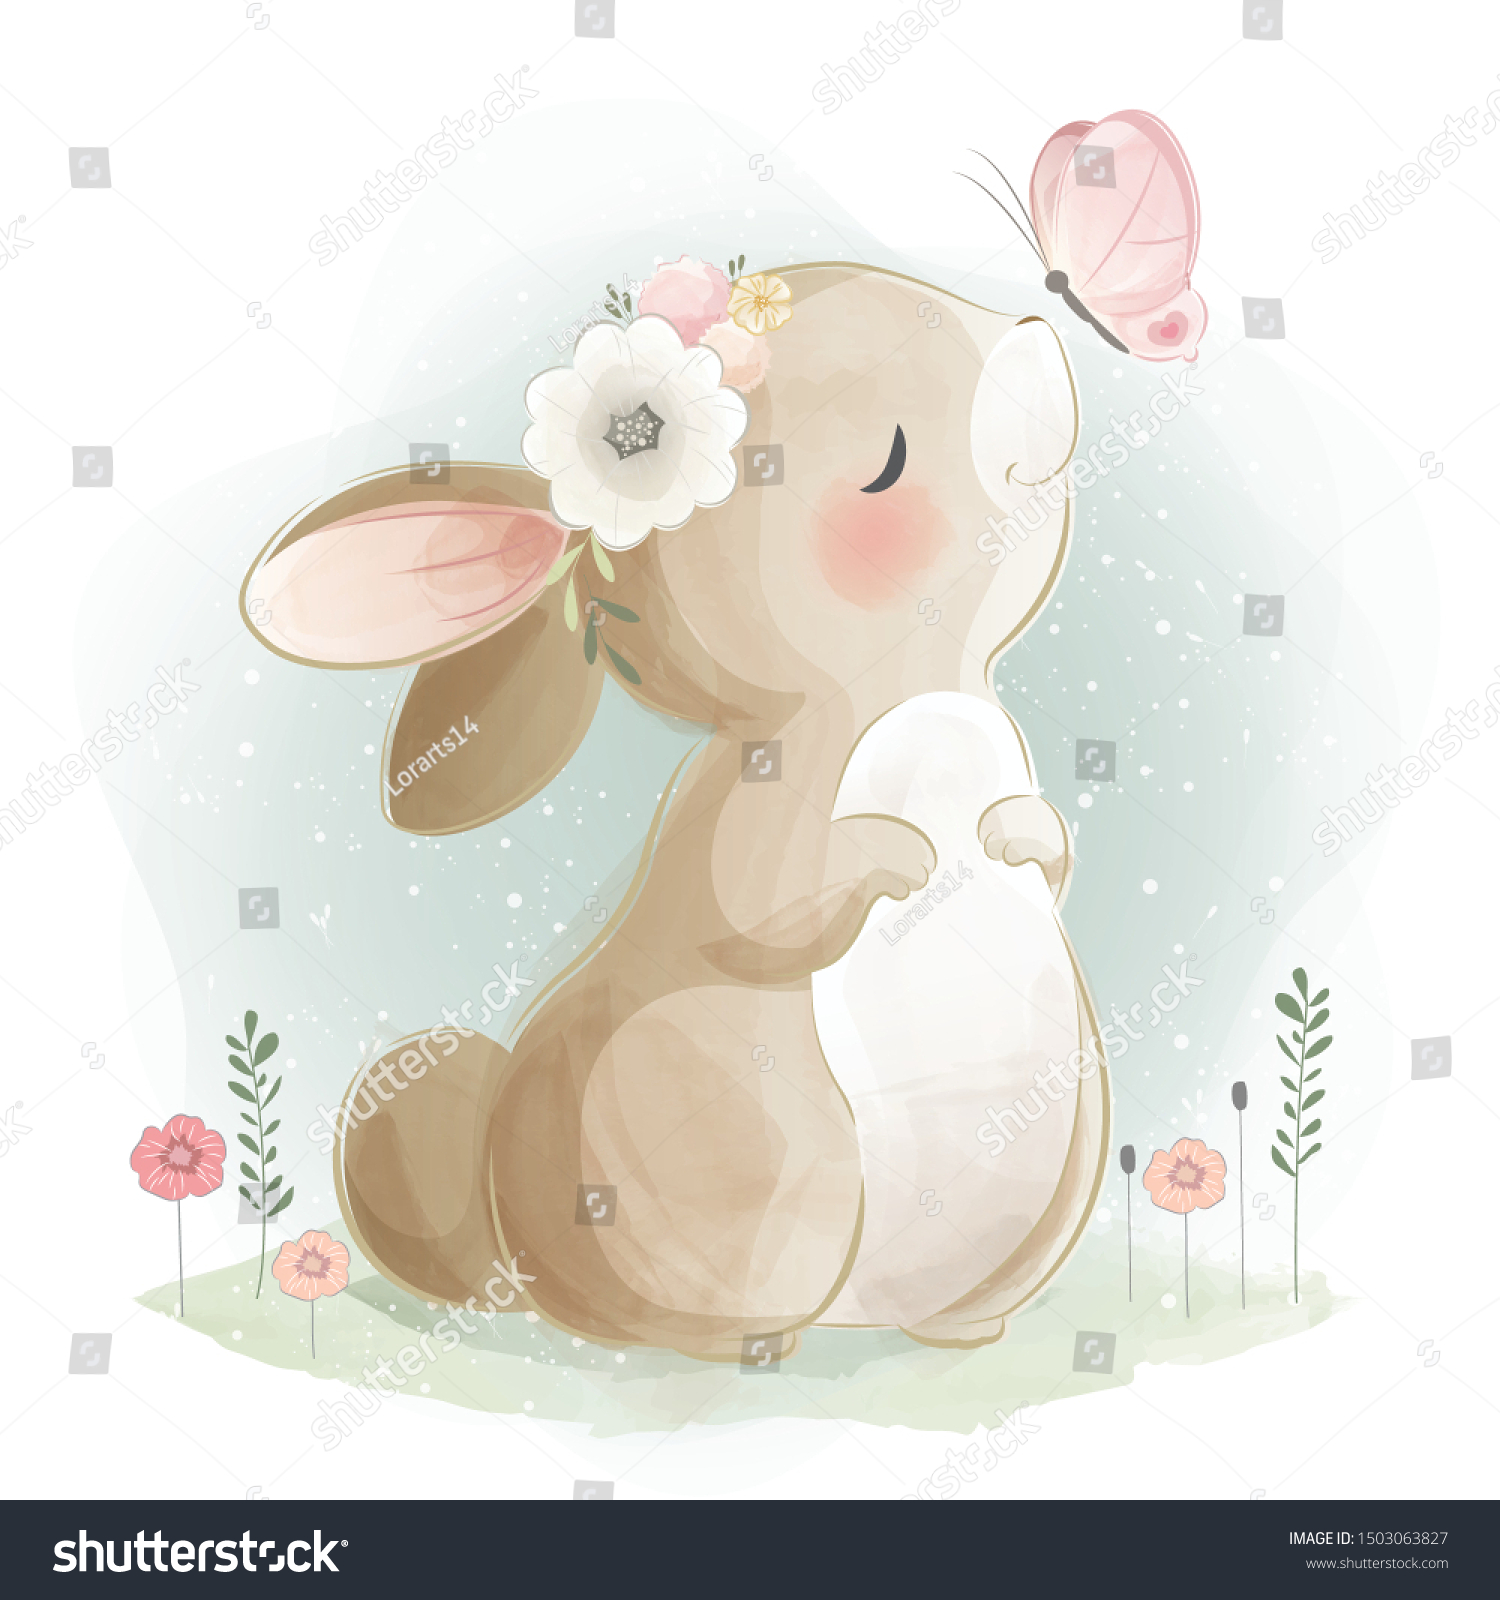 Cute Bunny Playing with Butterfly #1503063827